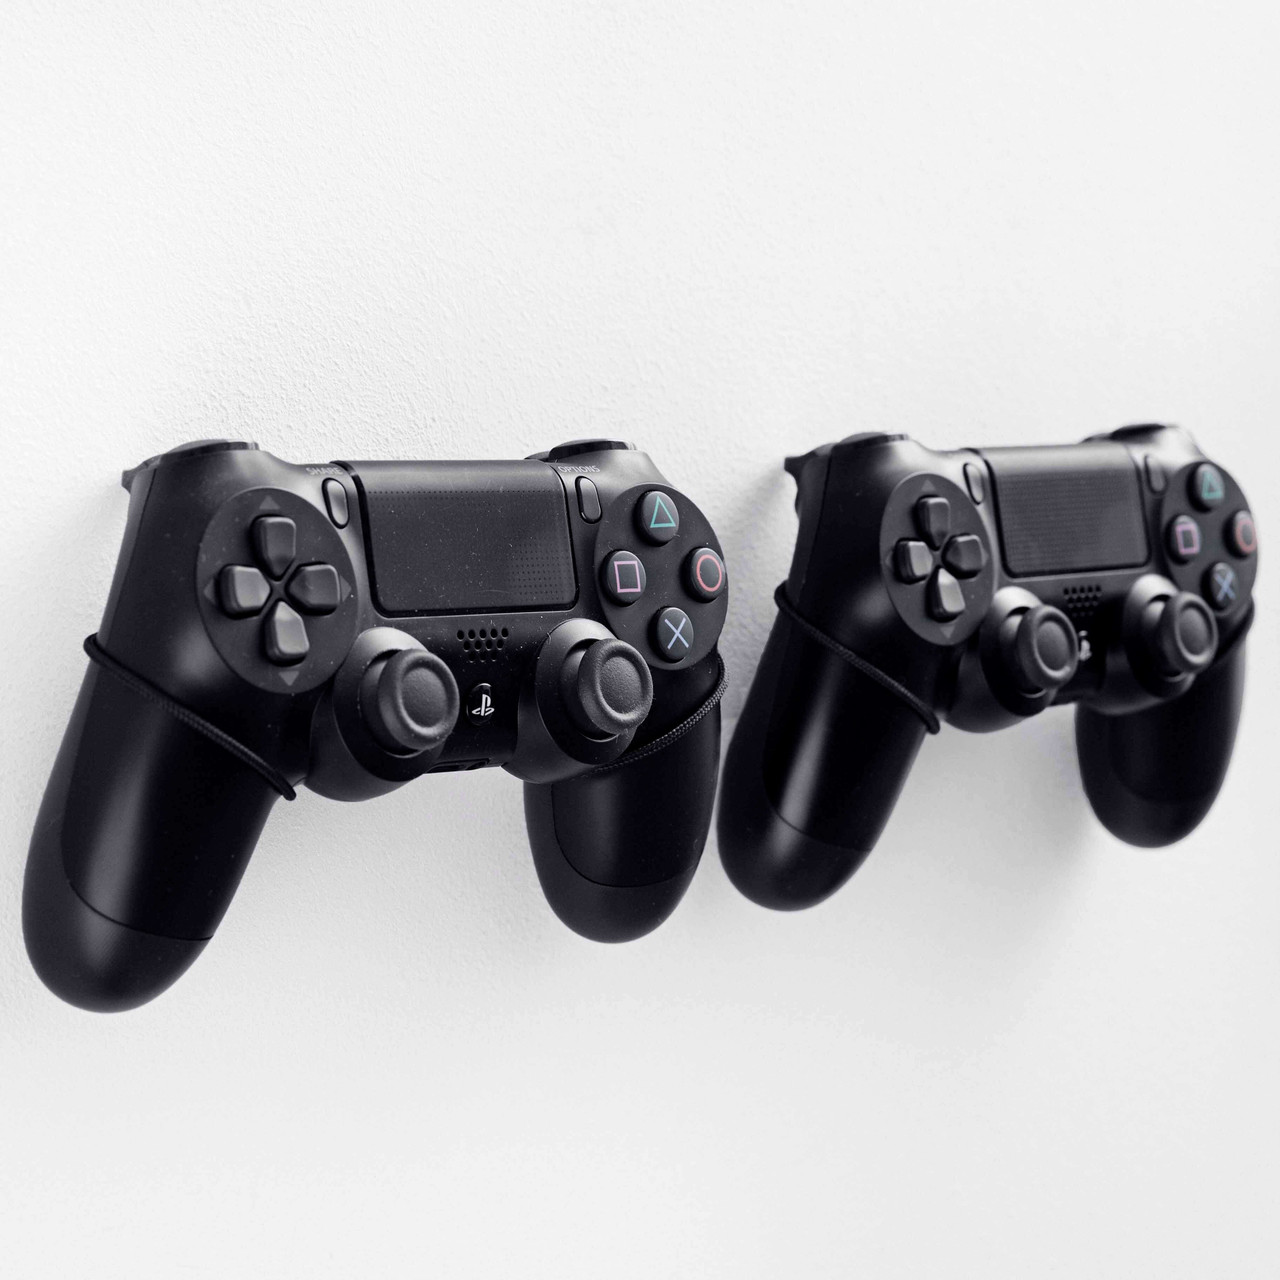 floating grip ps4